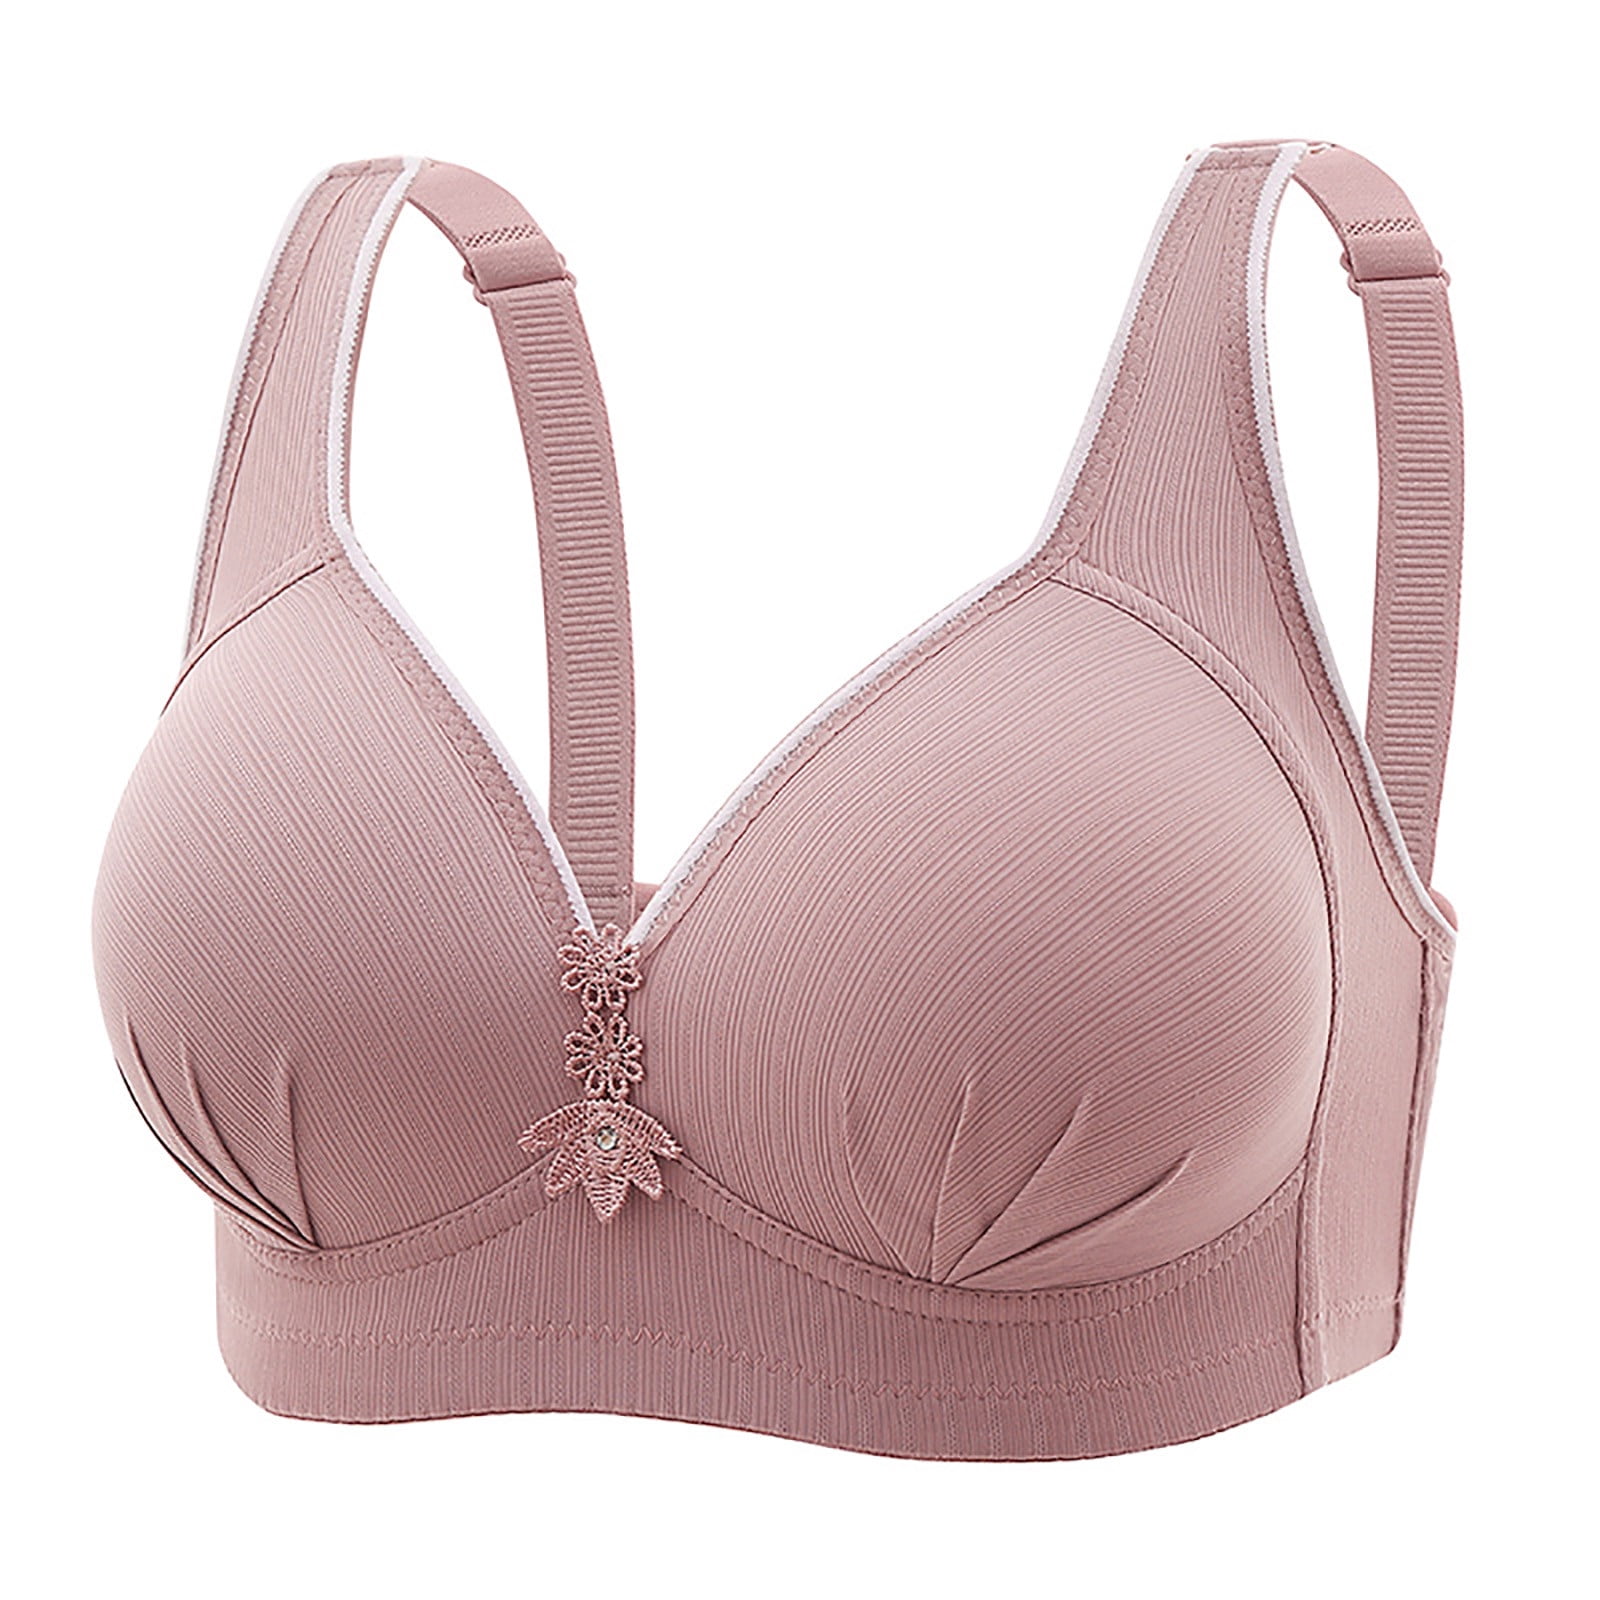 Nulu Wrap-Front Long-Line Bra finally gives my AA cup a hope : r